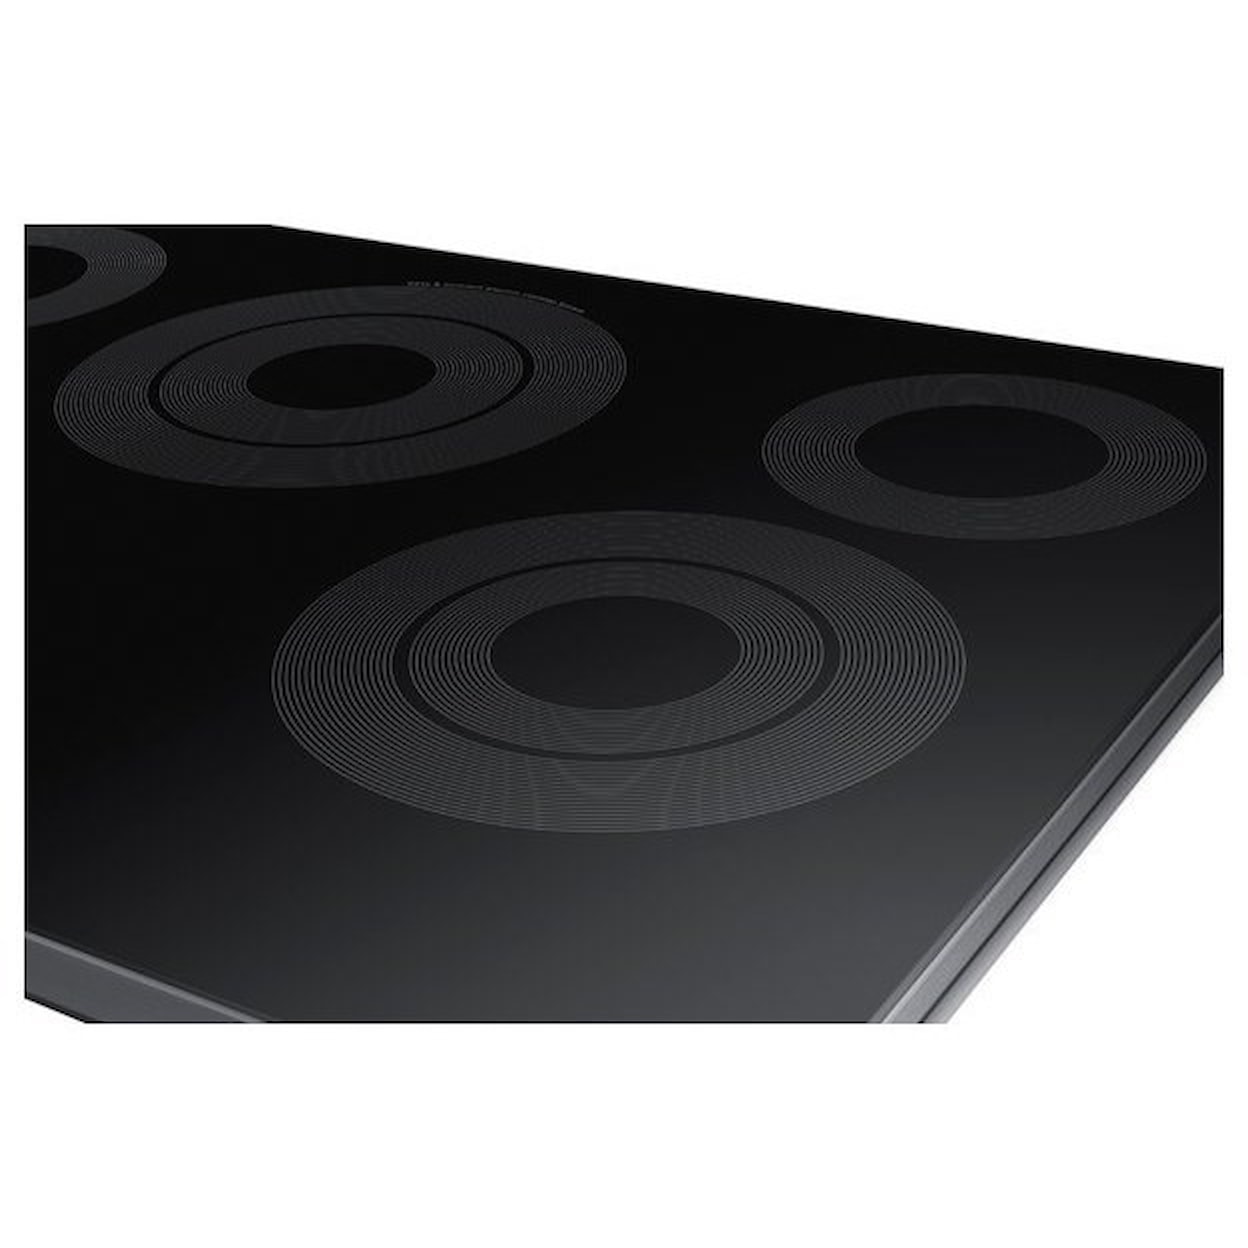 Samsung Appliances Electric Cooktops - Samsung 30" Electric Cooktop